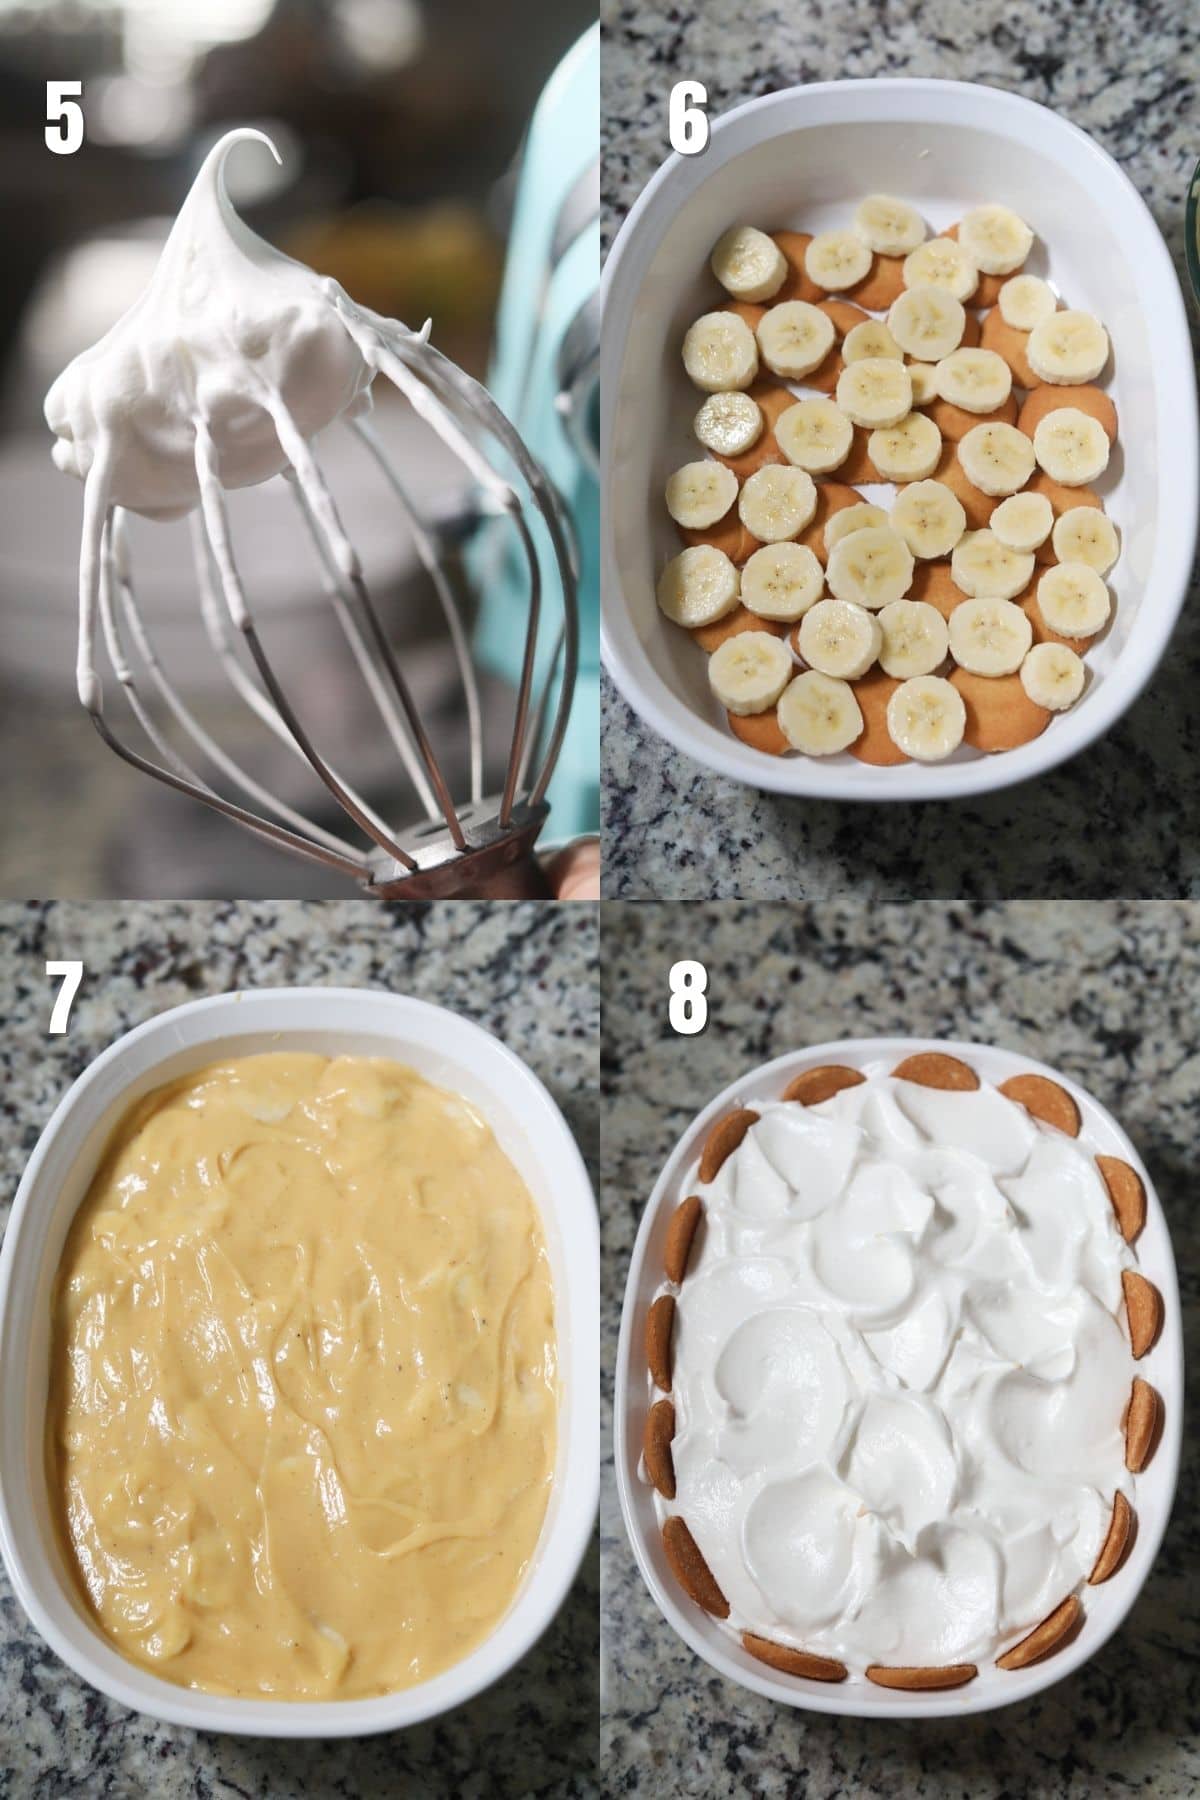 Step-by-step images for making old-fashioned banana pudding.